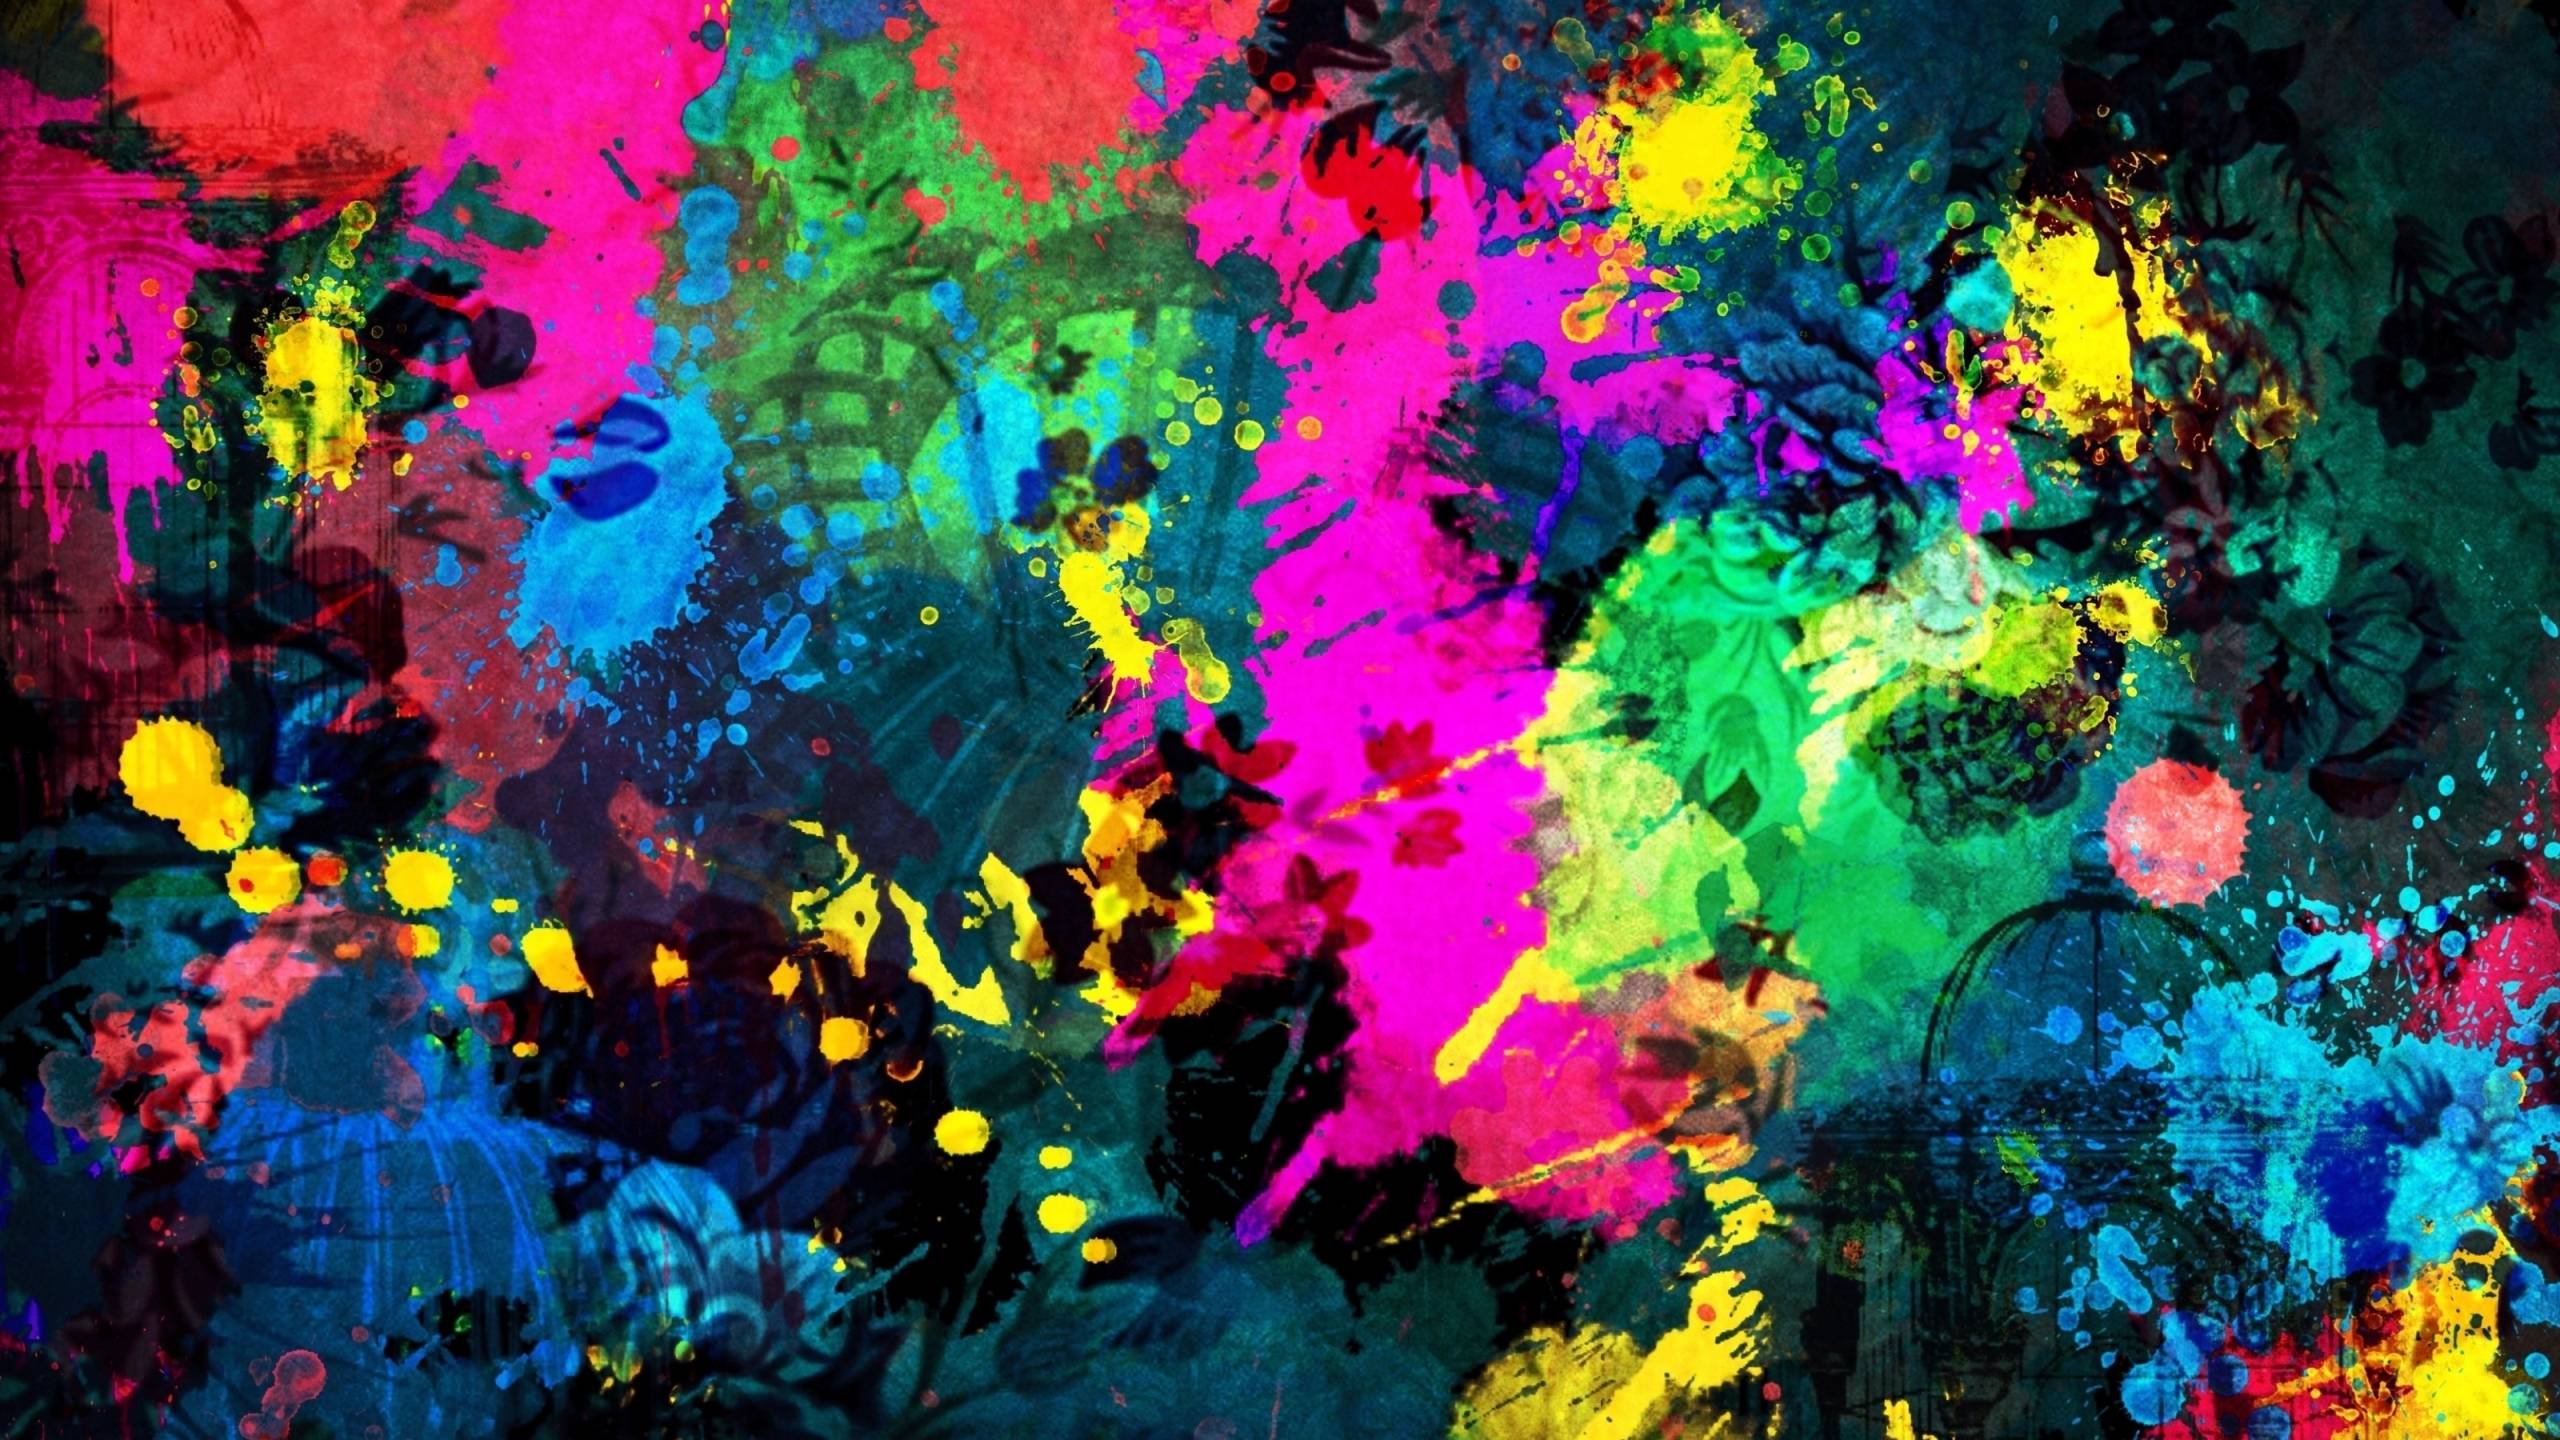 Colorful Paint Splatter Wallpaper for iMac. High Quality PC